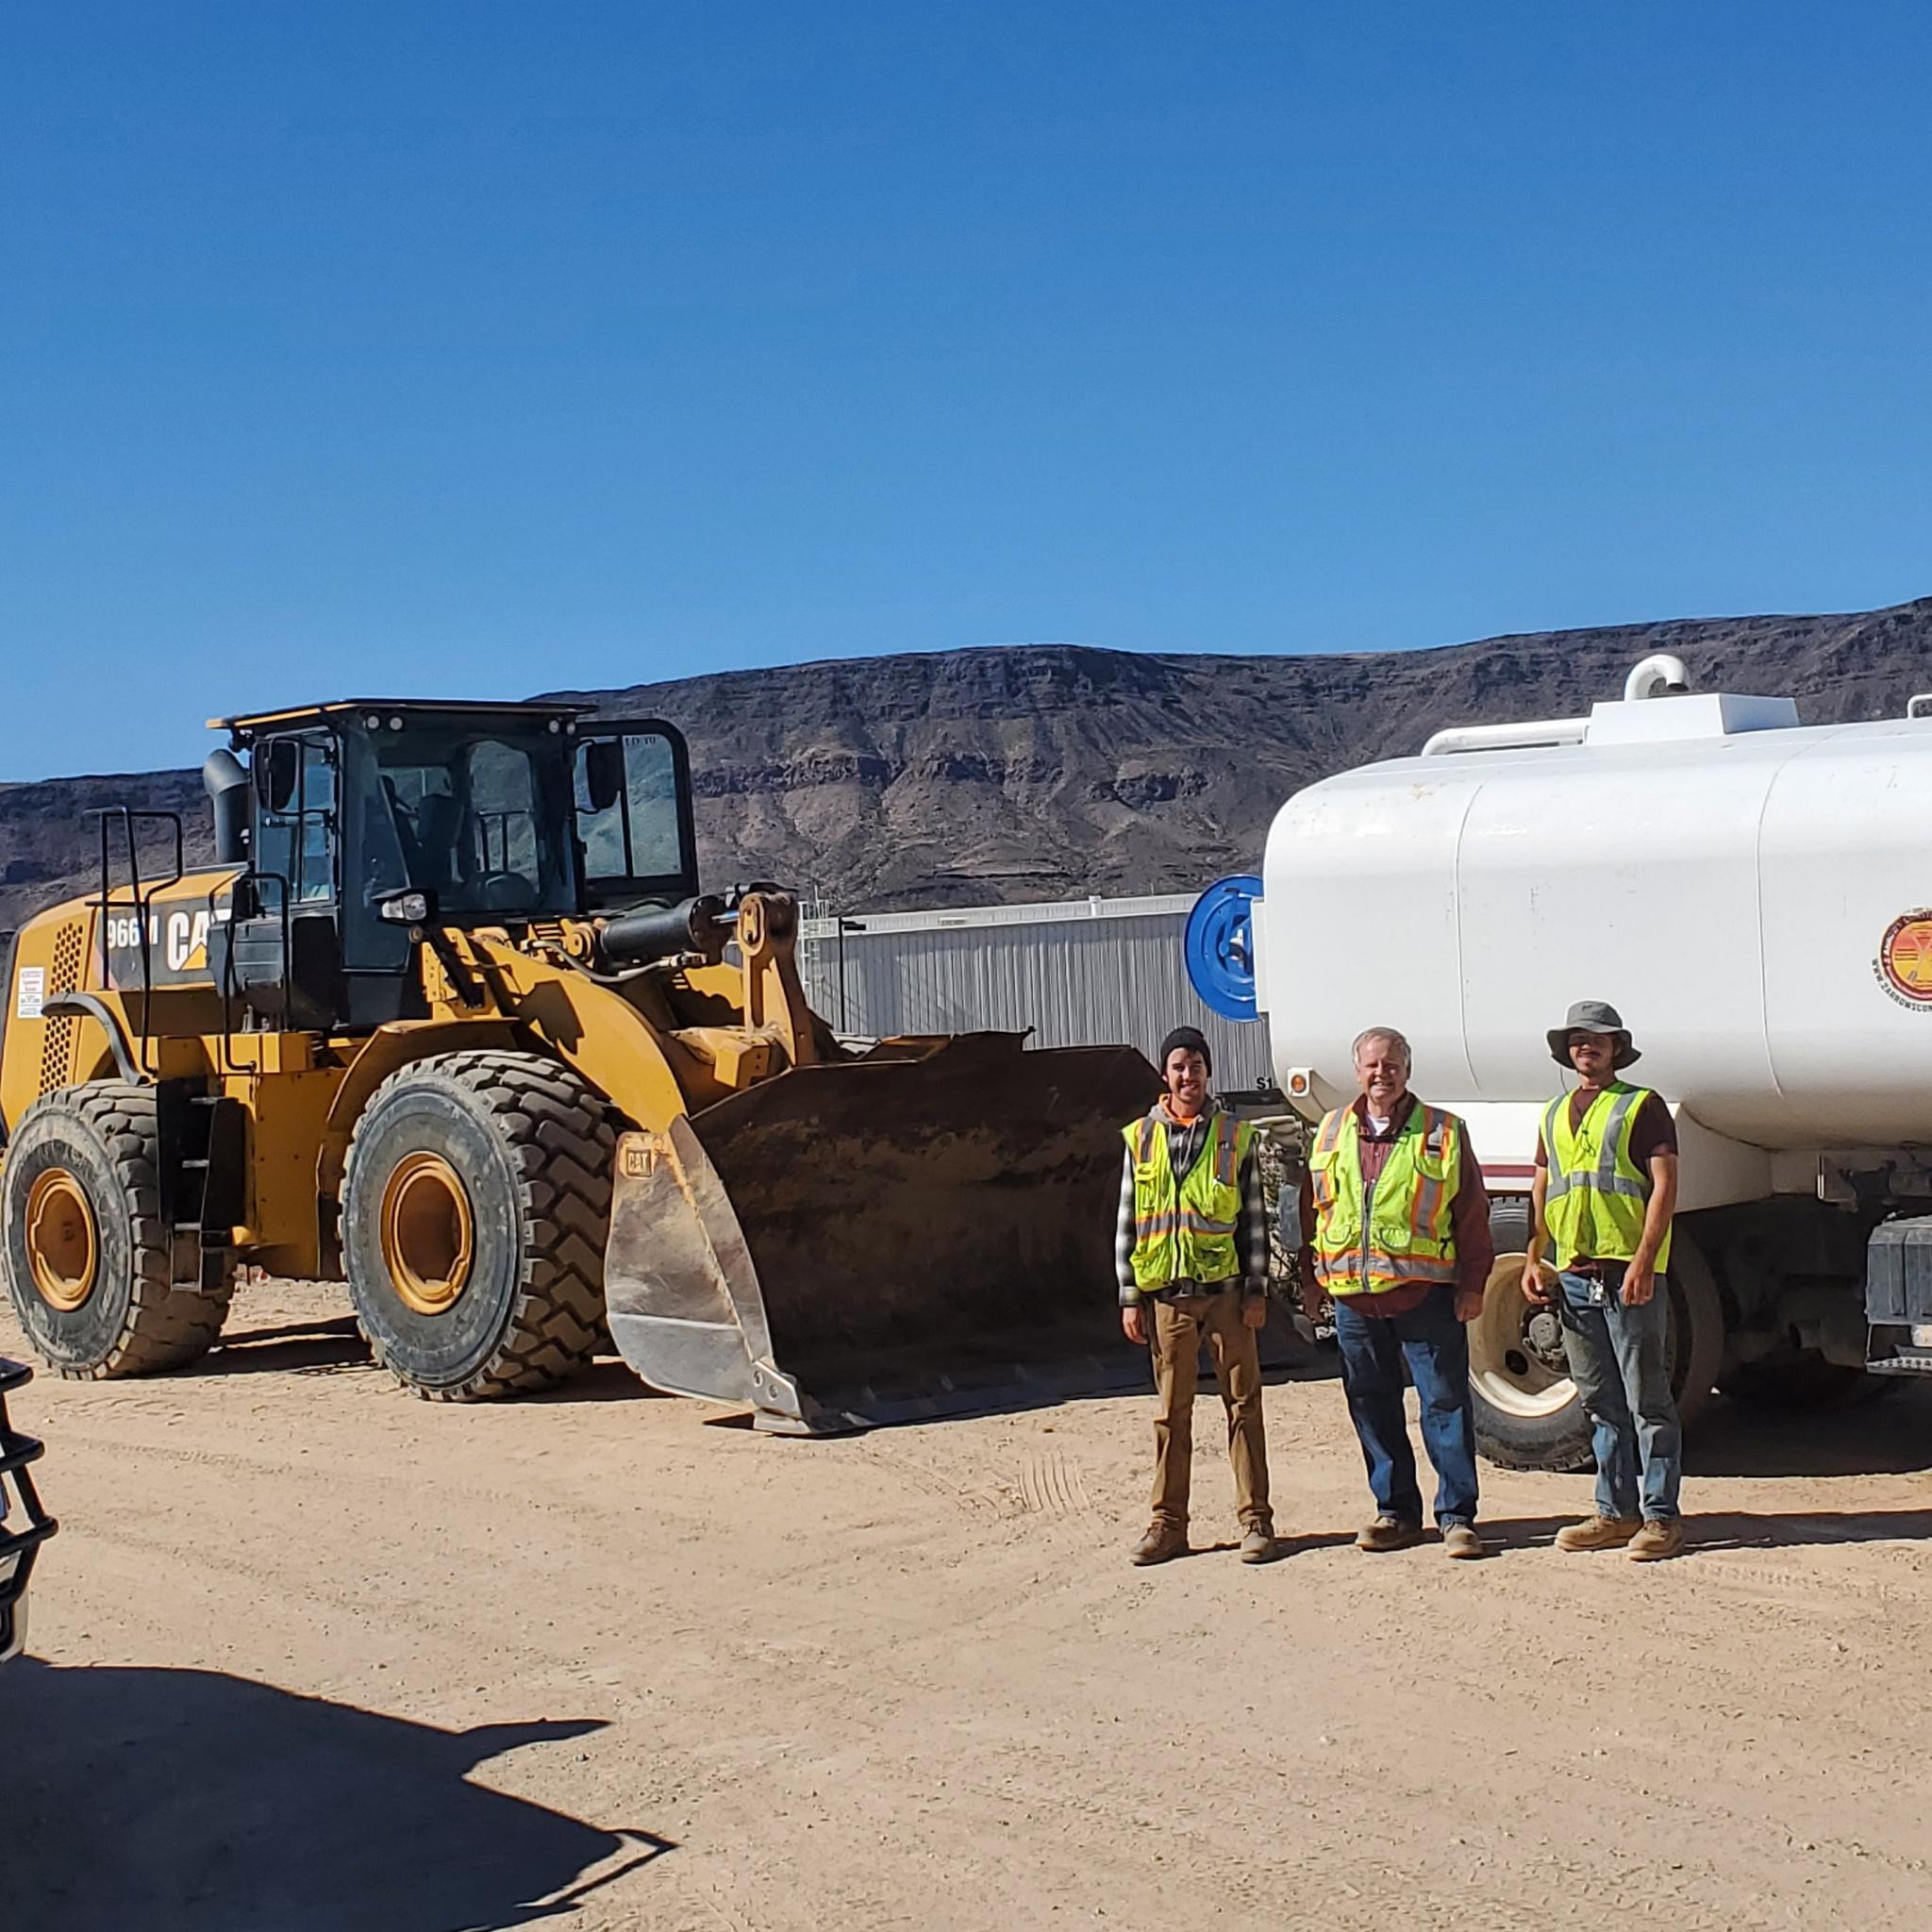 Group photo in front of water truck and loader